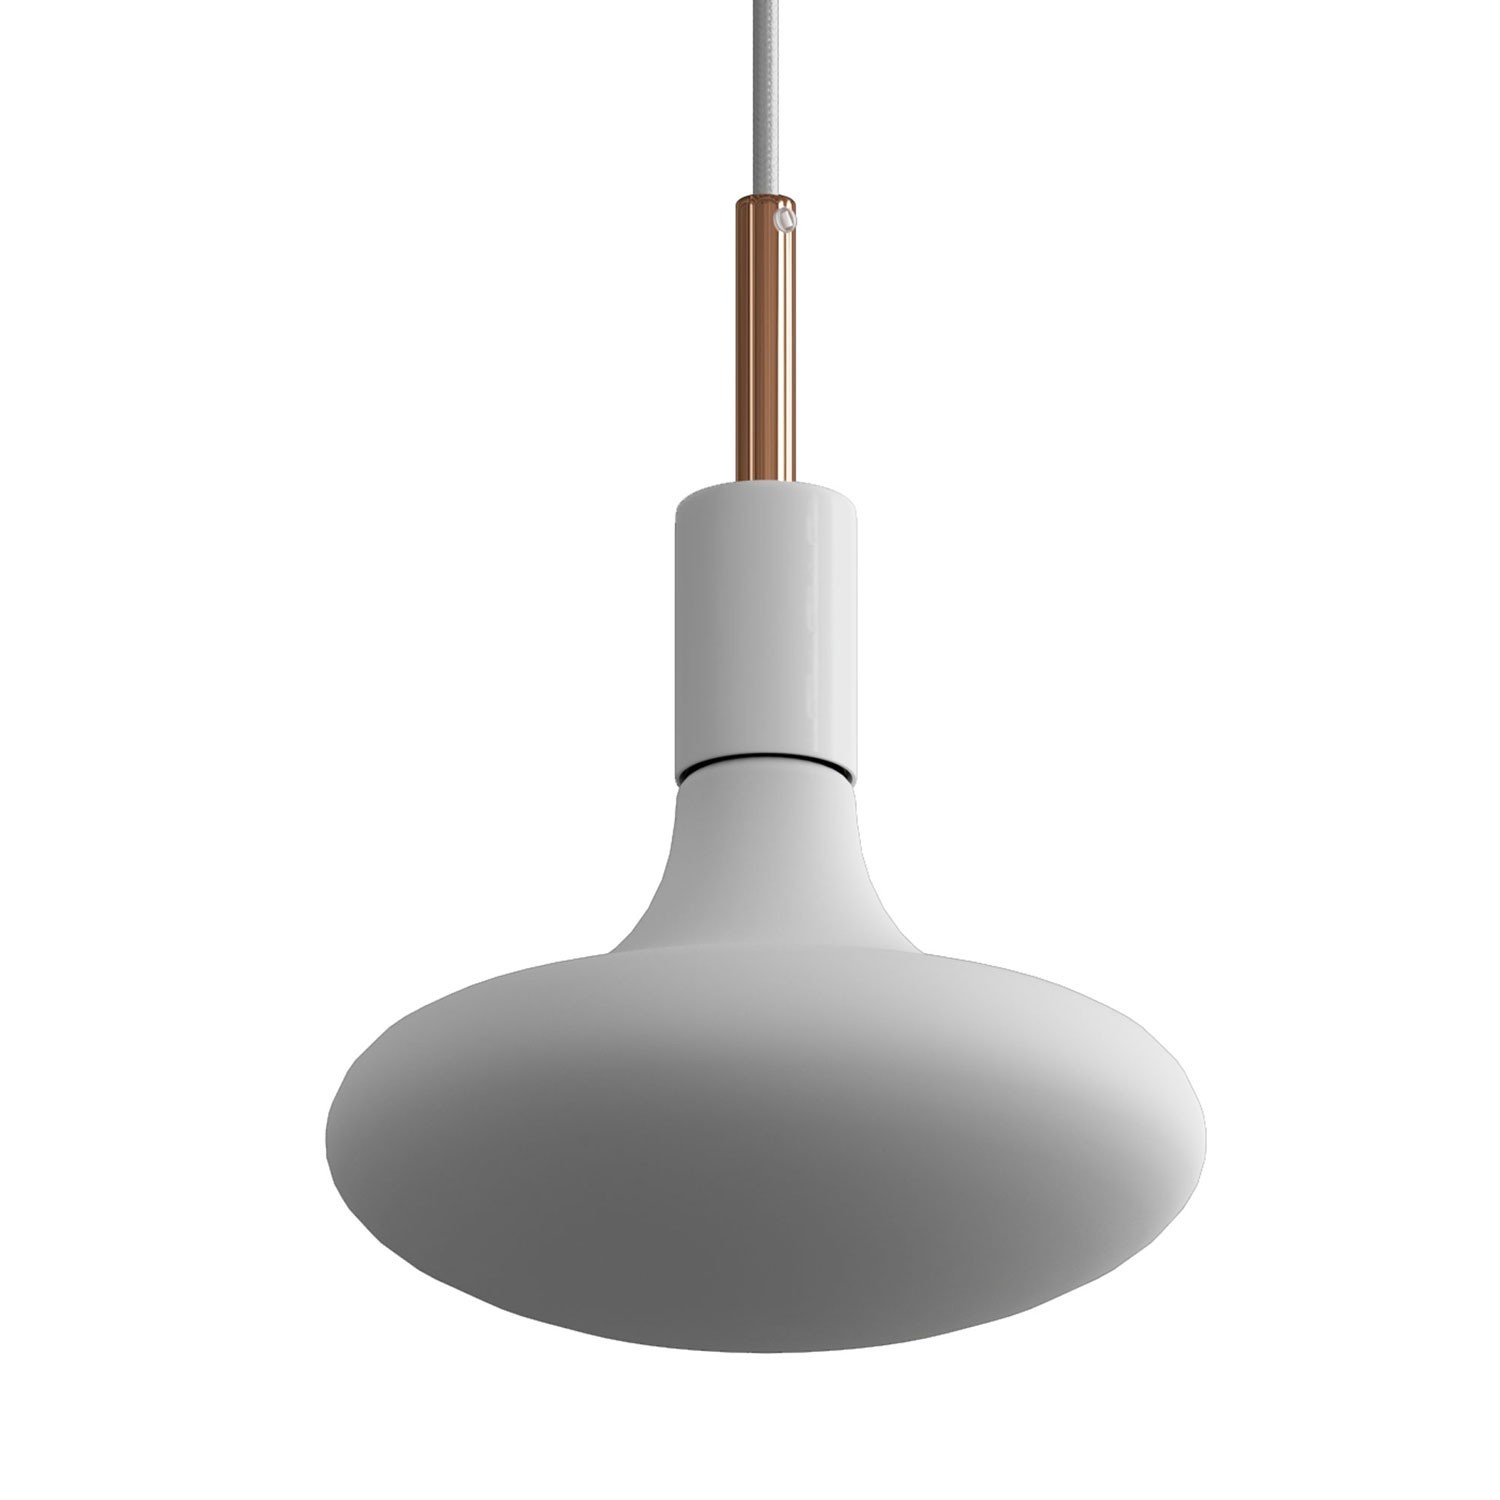 Pendant lamp with textile cable, metal details and 7cm cable clamp - Made in Italy